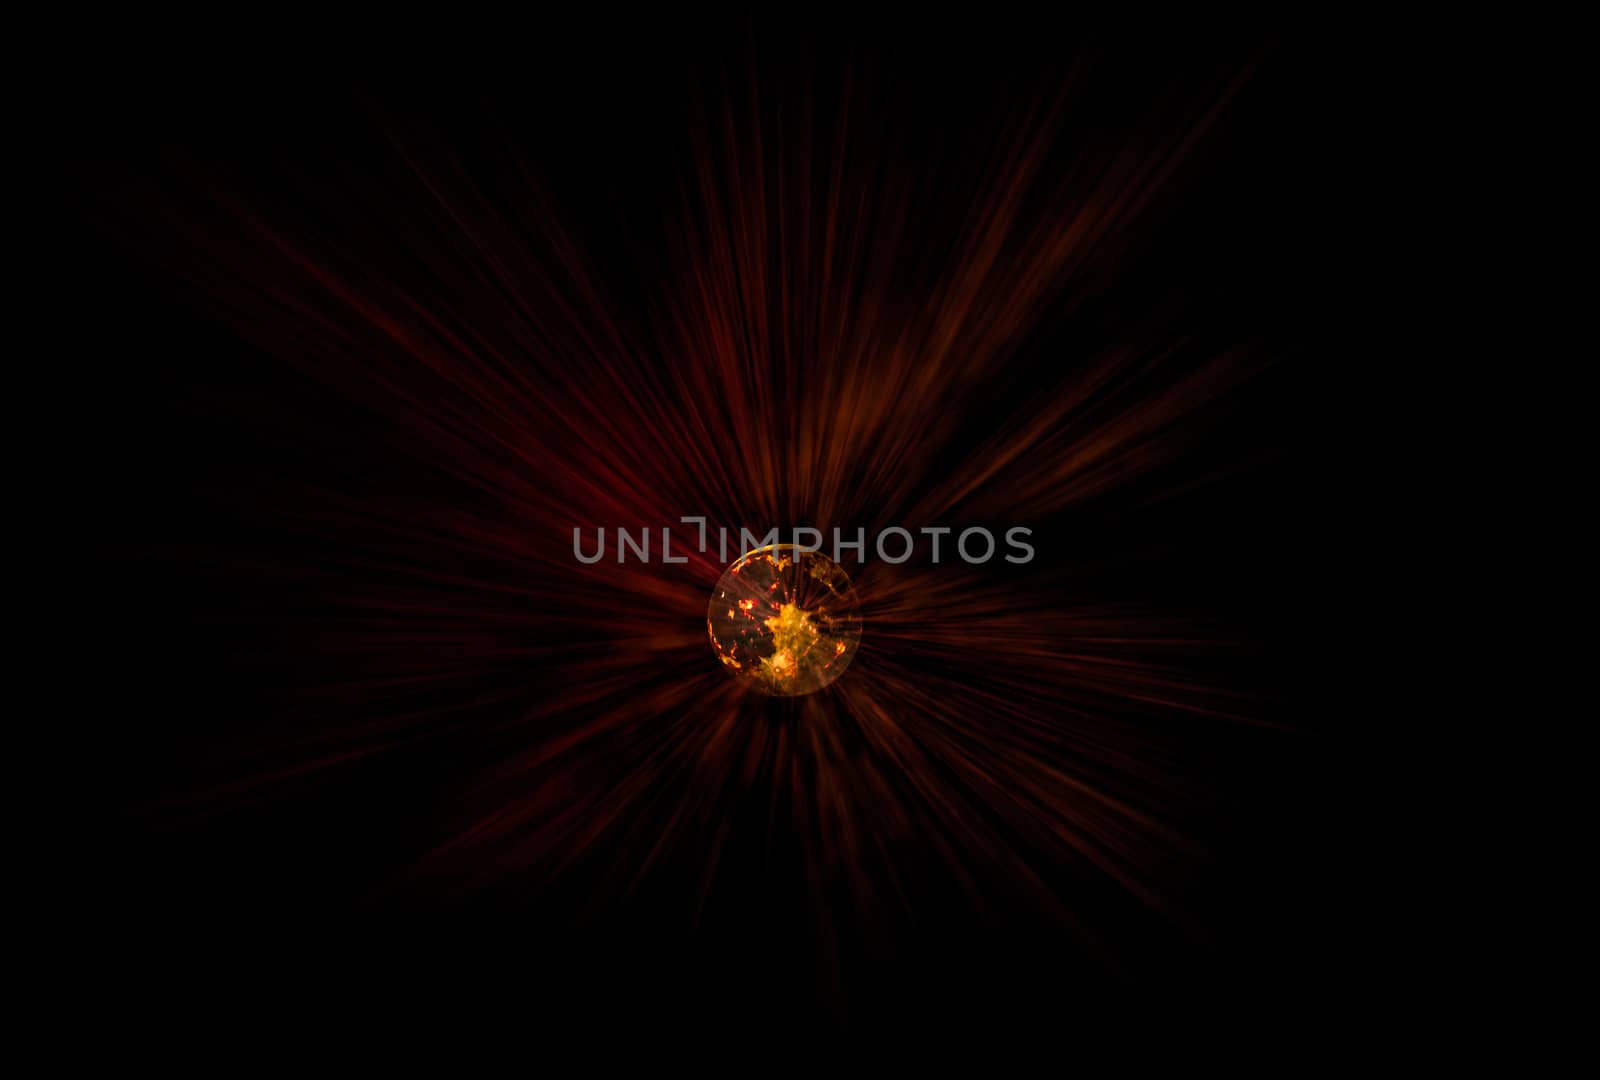 View of the Moon emitting red-and-orange rays on black background. Composite picture